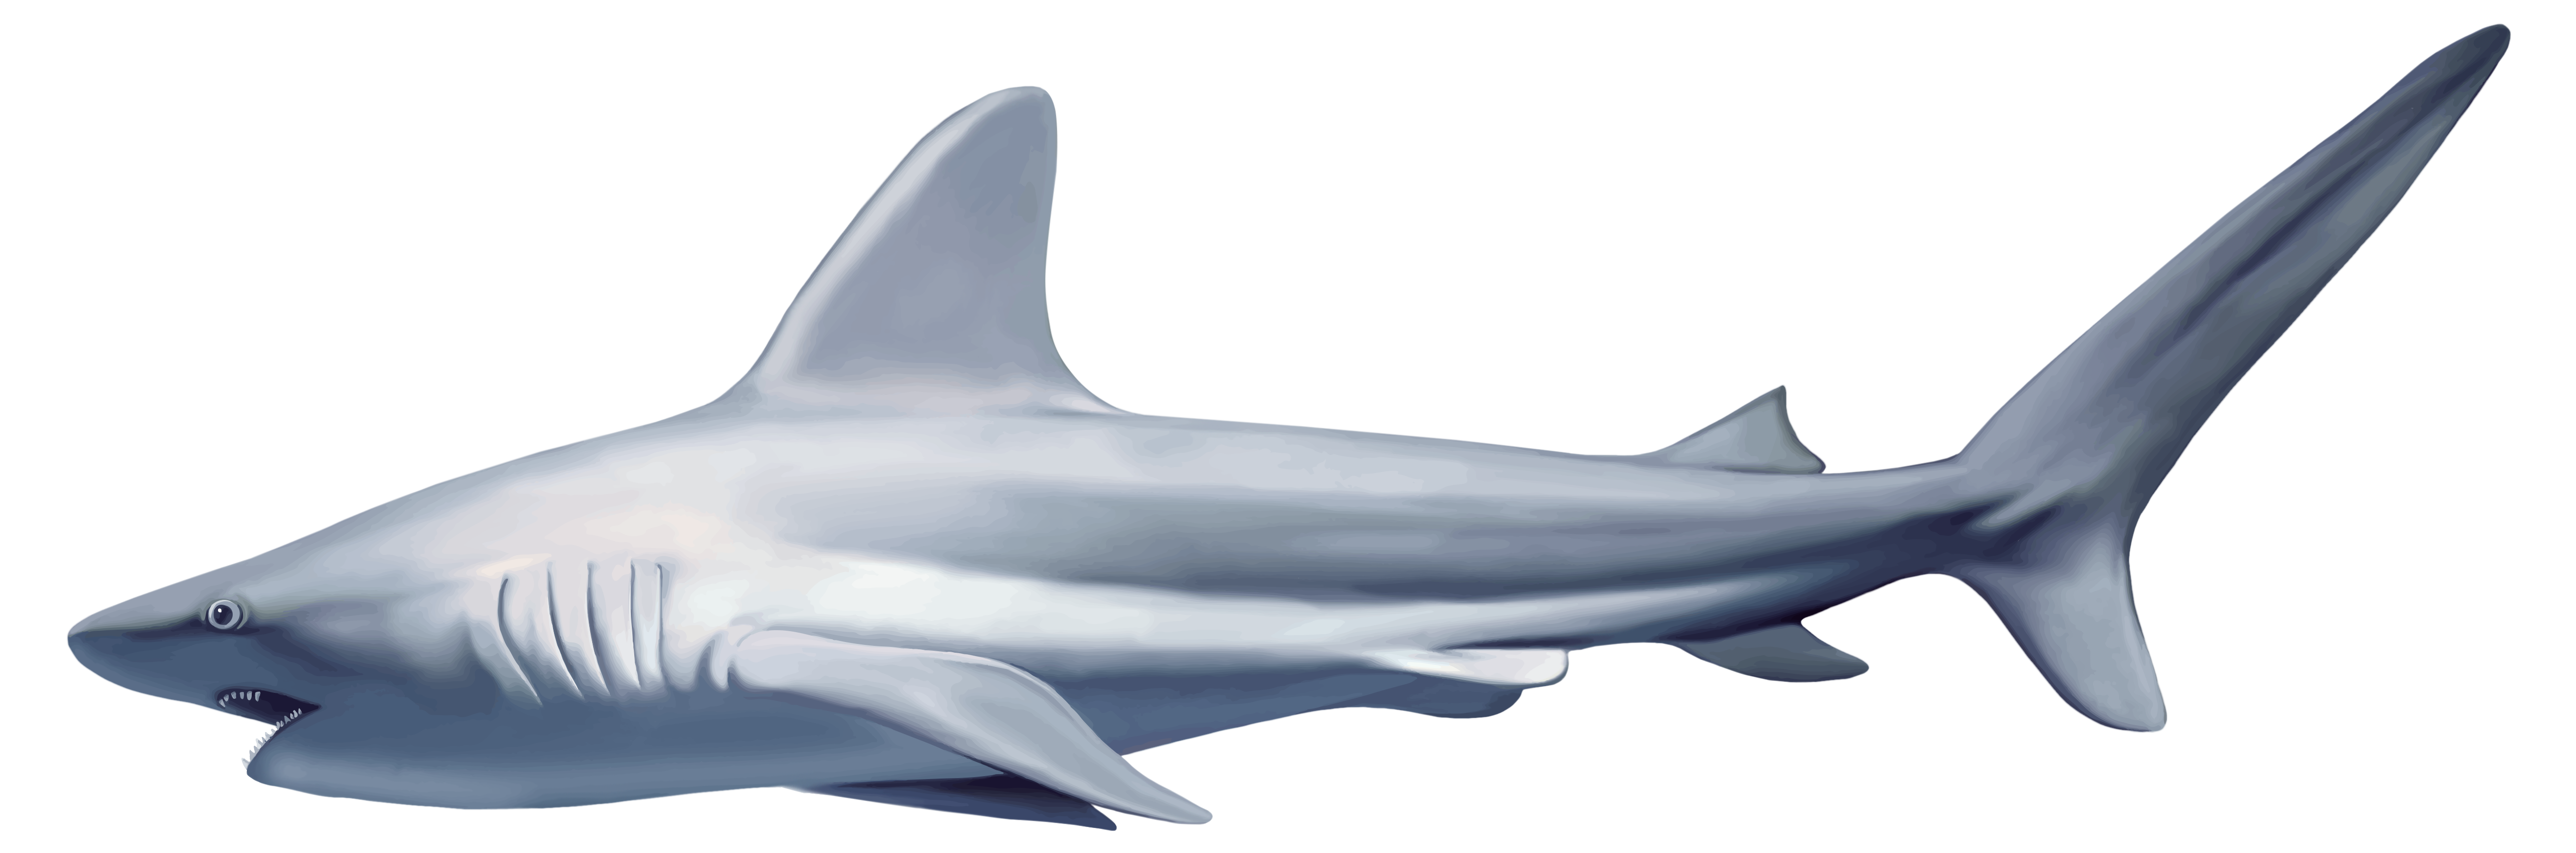 diving clipart swim with shark